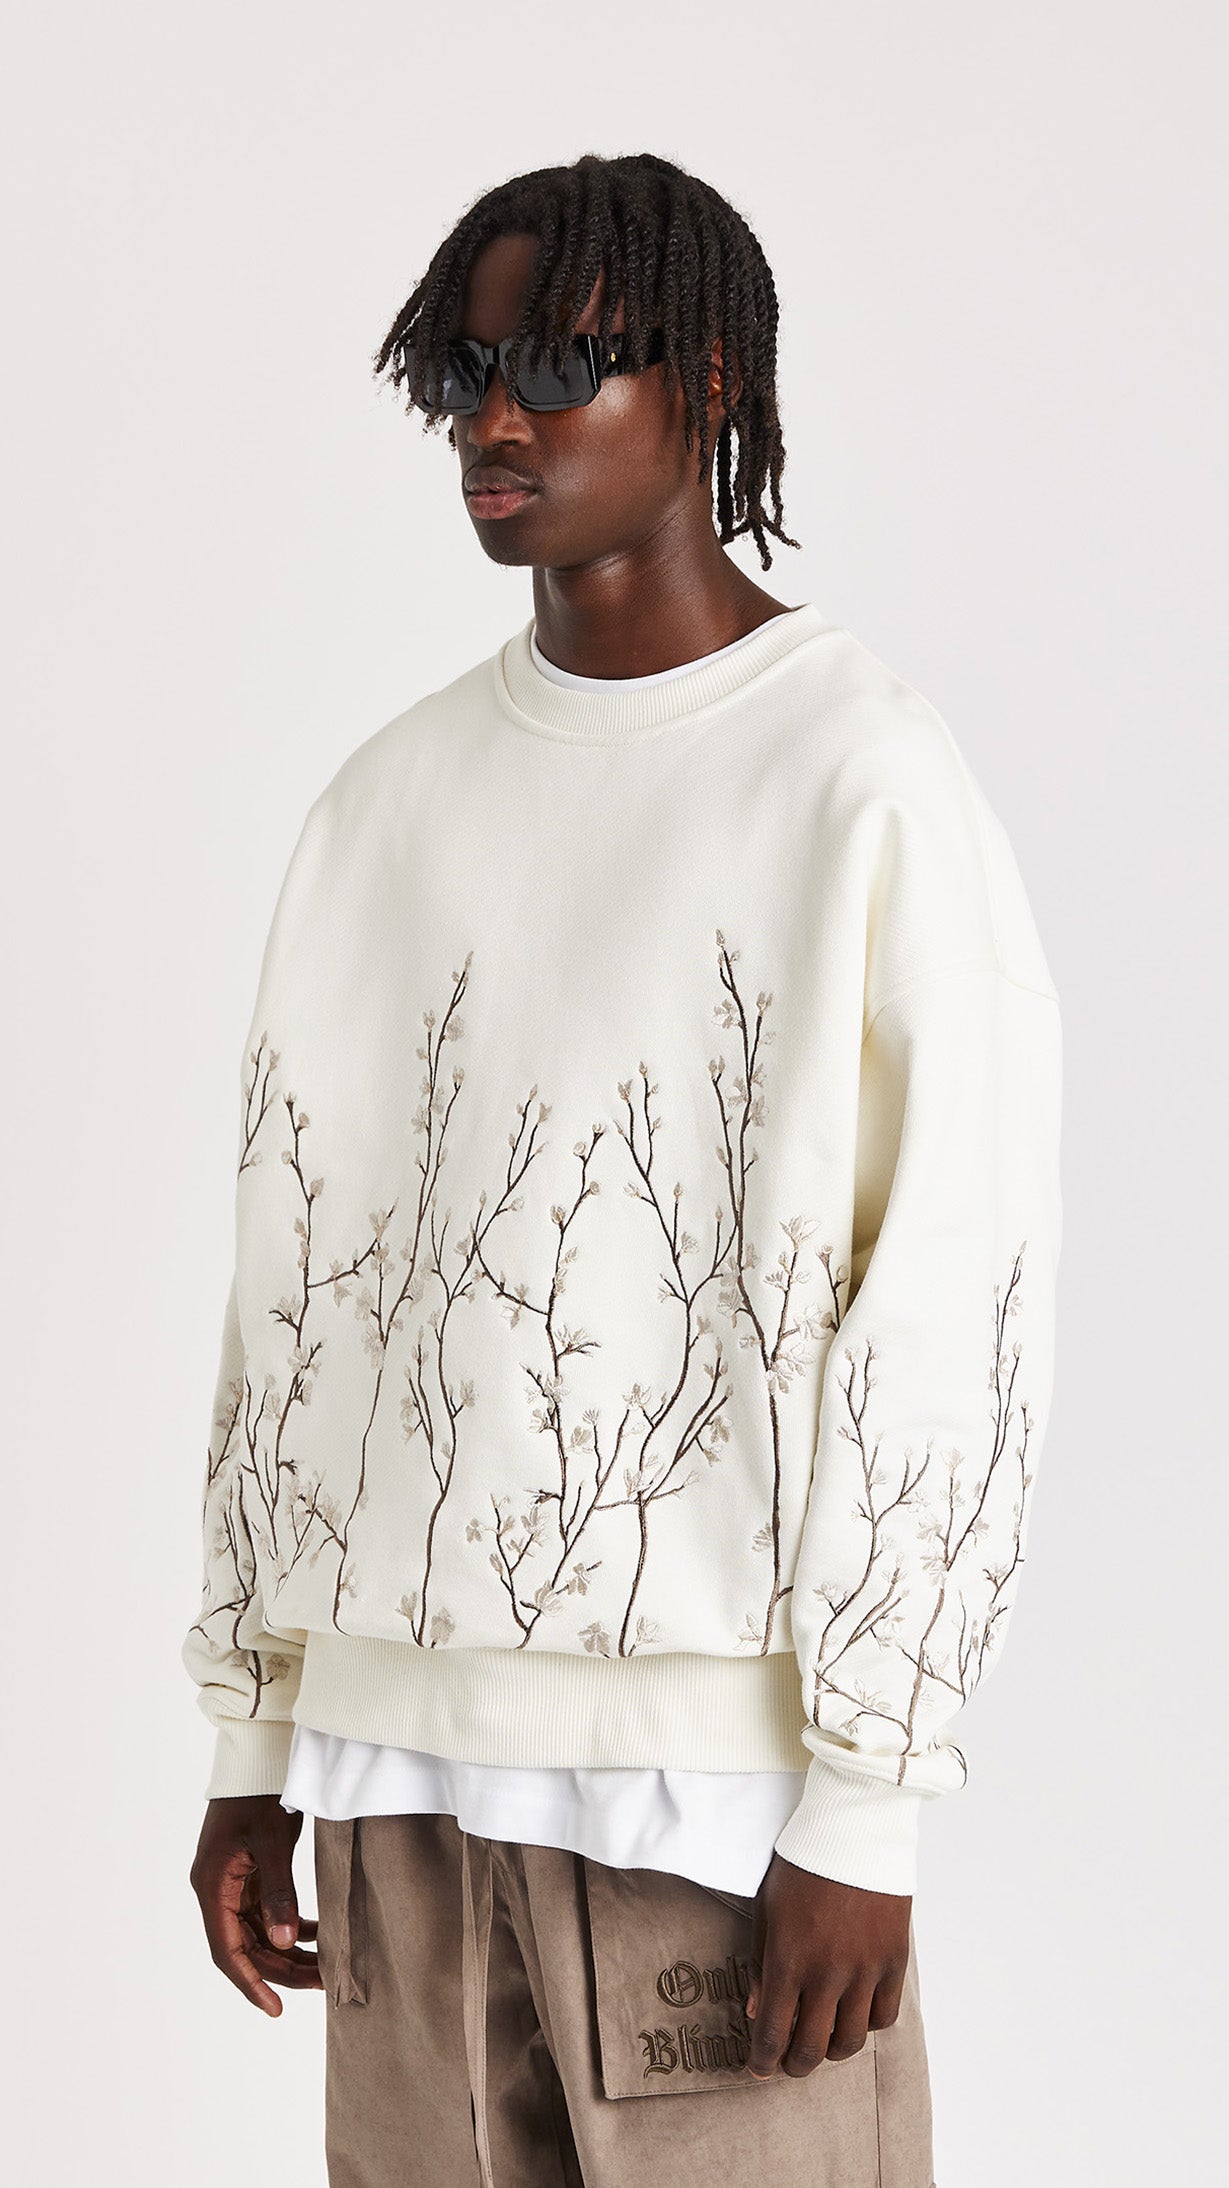 ONLY THE BLIND - Orchard Blossom Crewneck